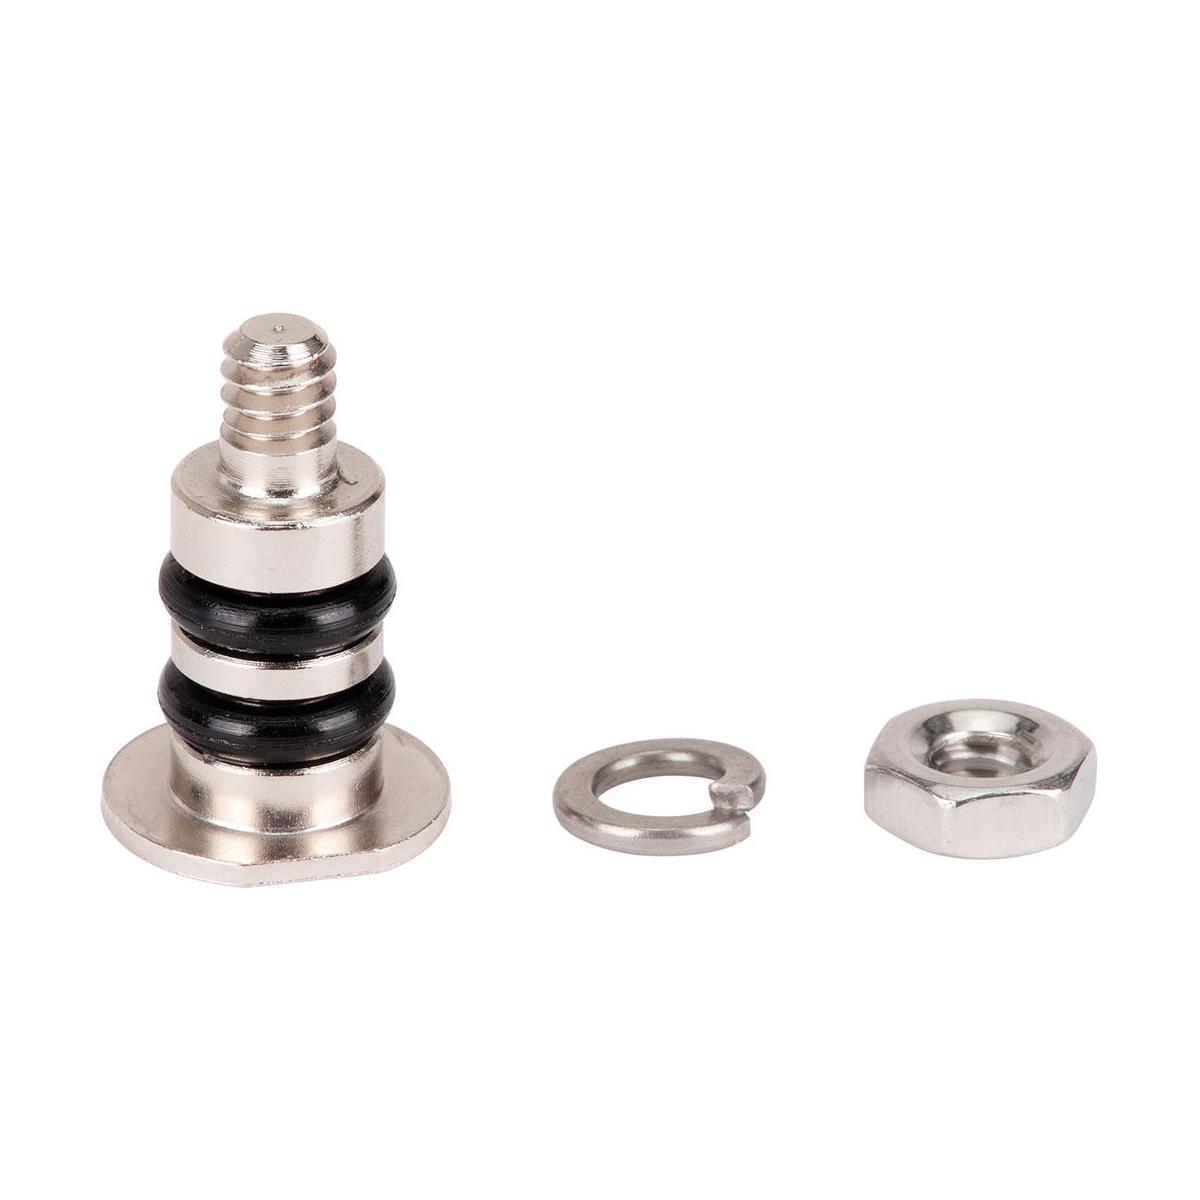 Image of Ikelite Bolt Nut and O-Ring Assembly for Lid Snap Closure of 5710 Housing Kit